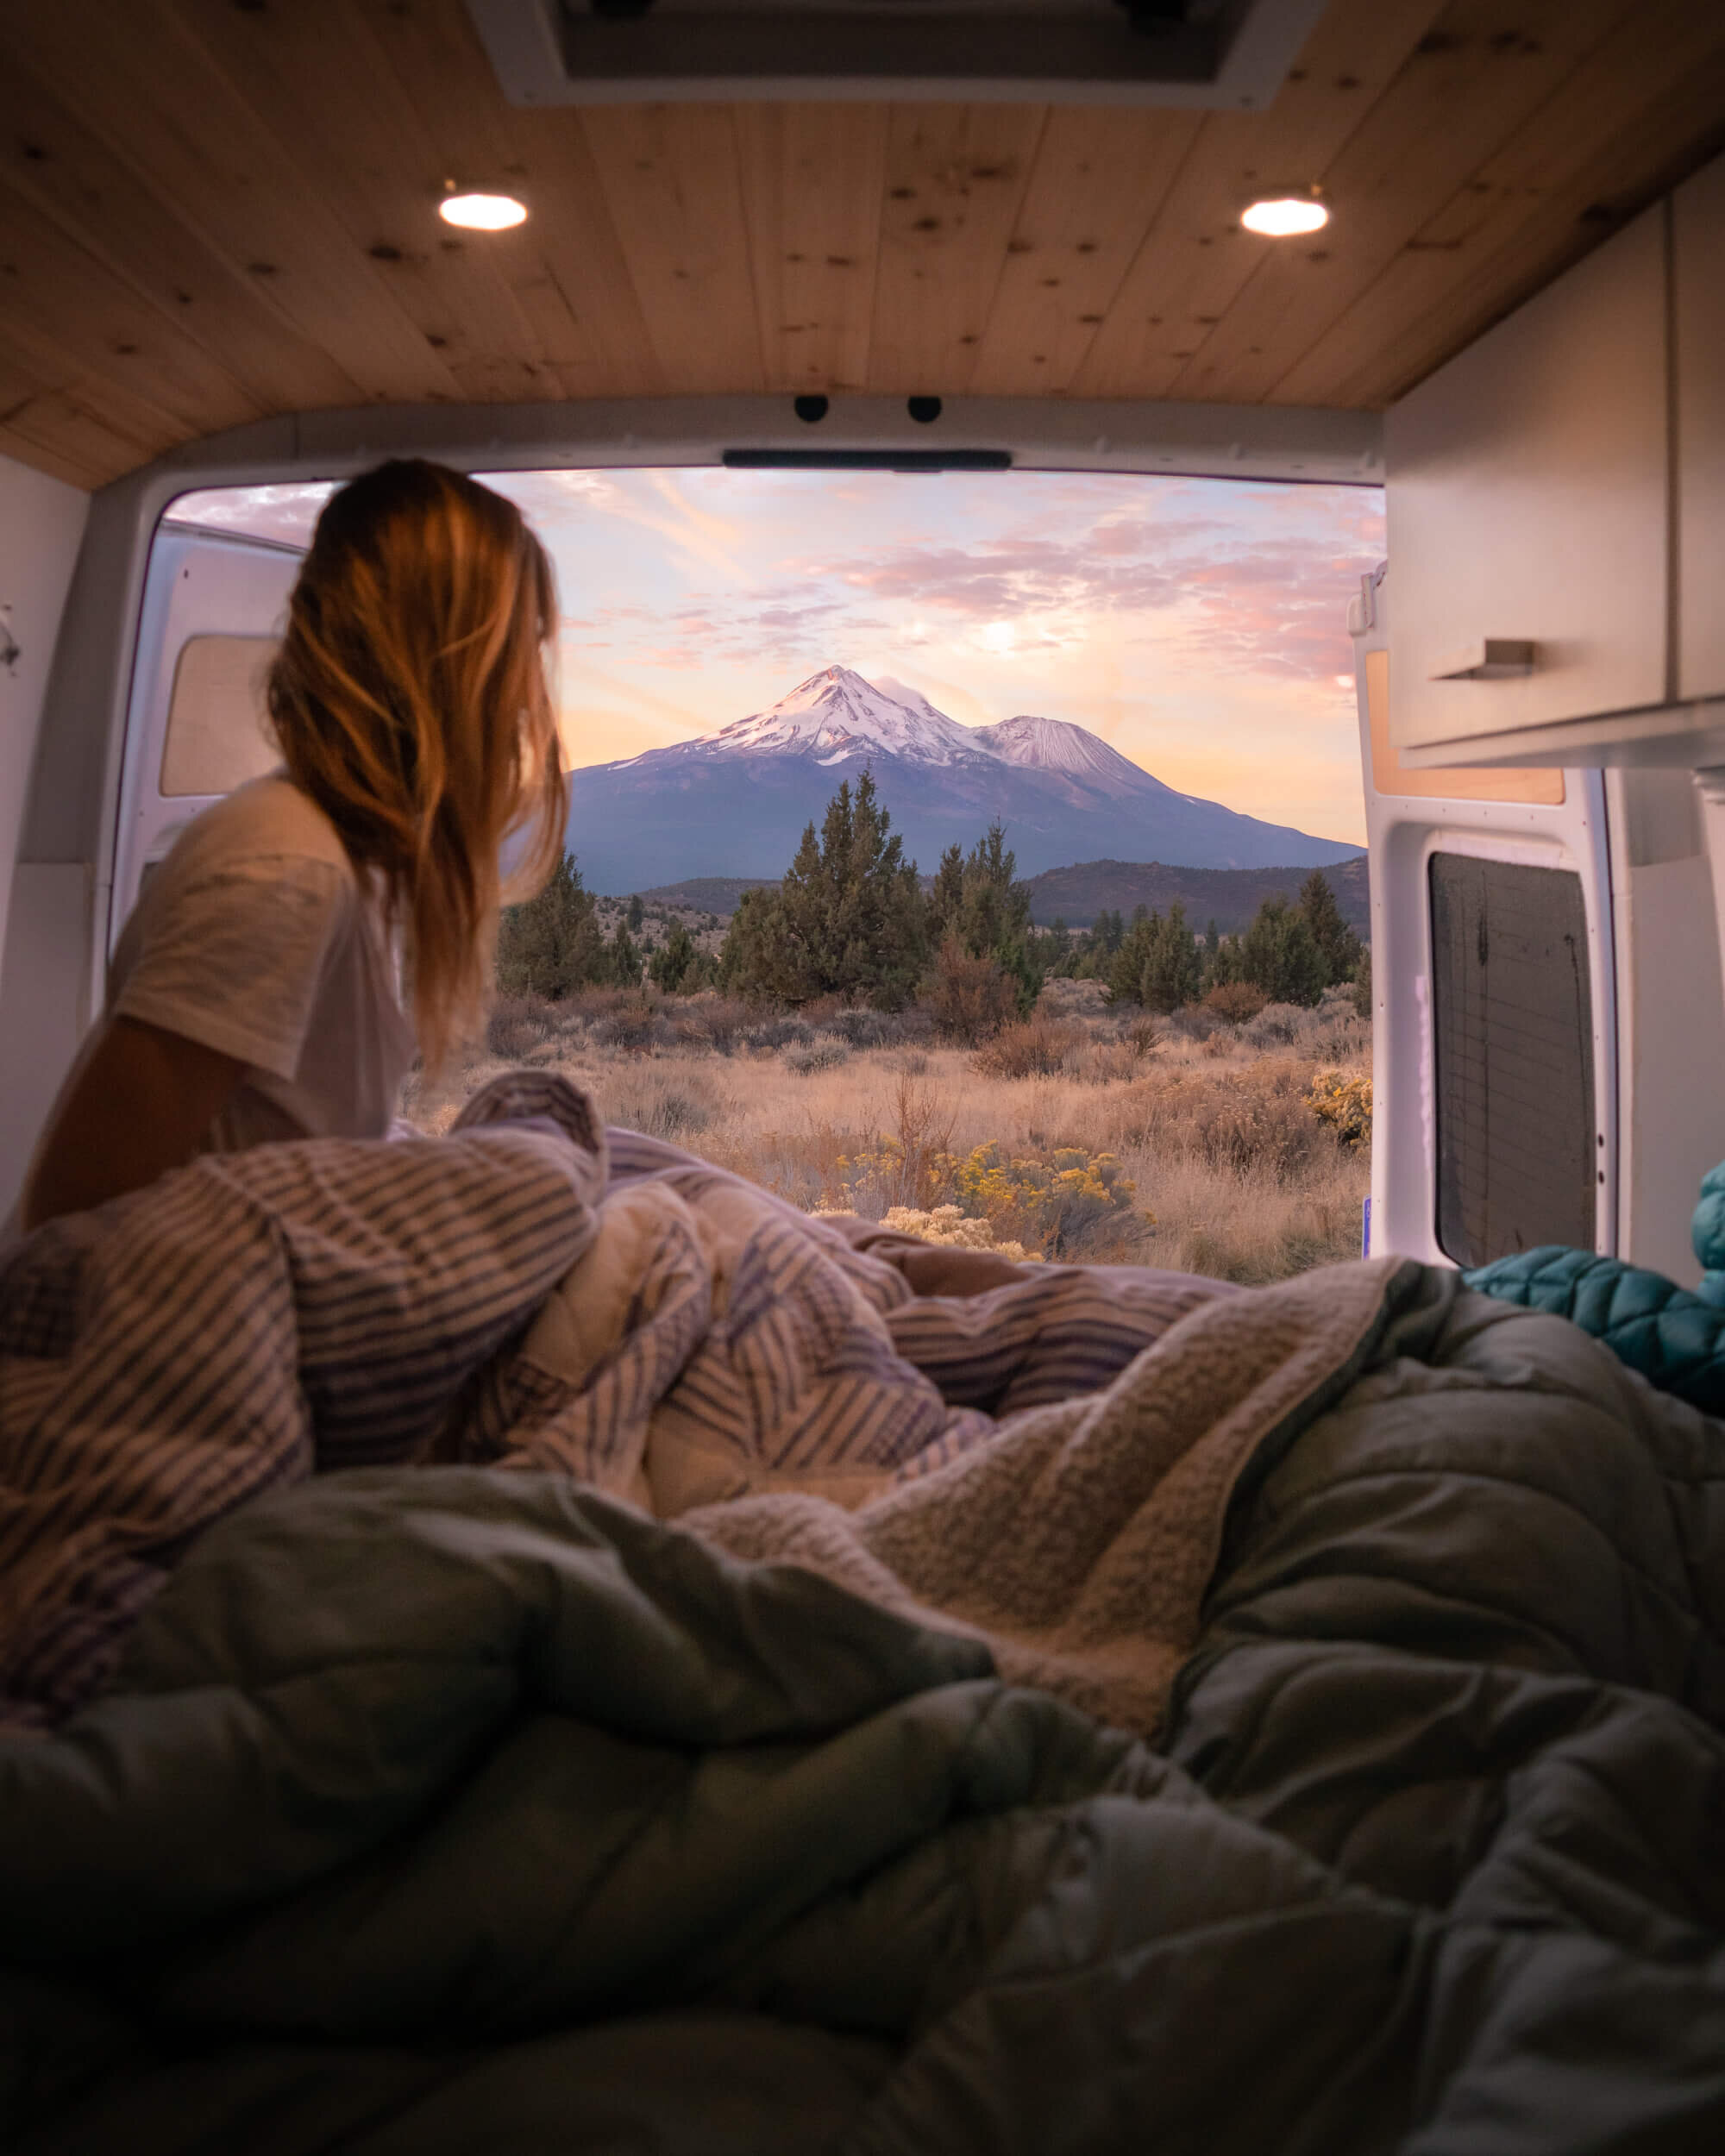 Taking in a spectacular sunrise over Mount Shasta from the back of our camper van.